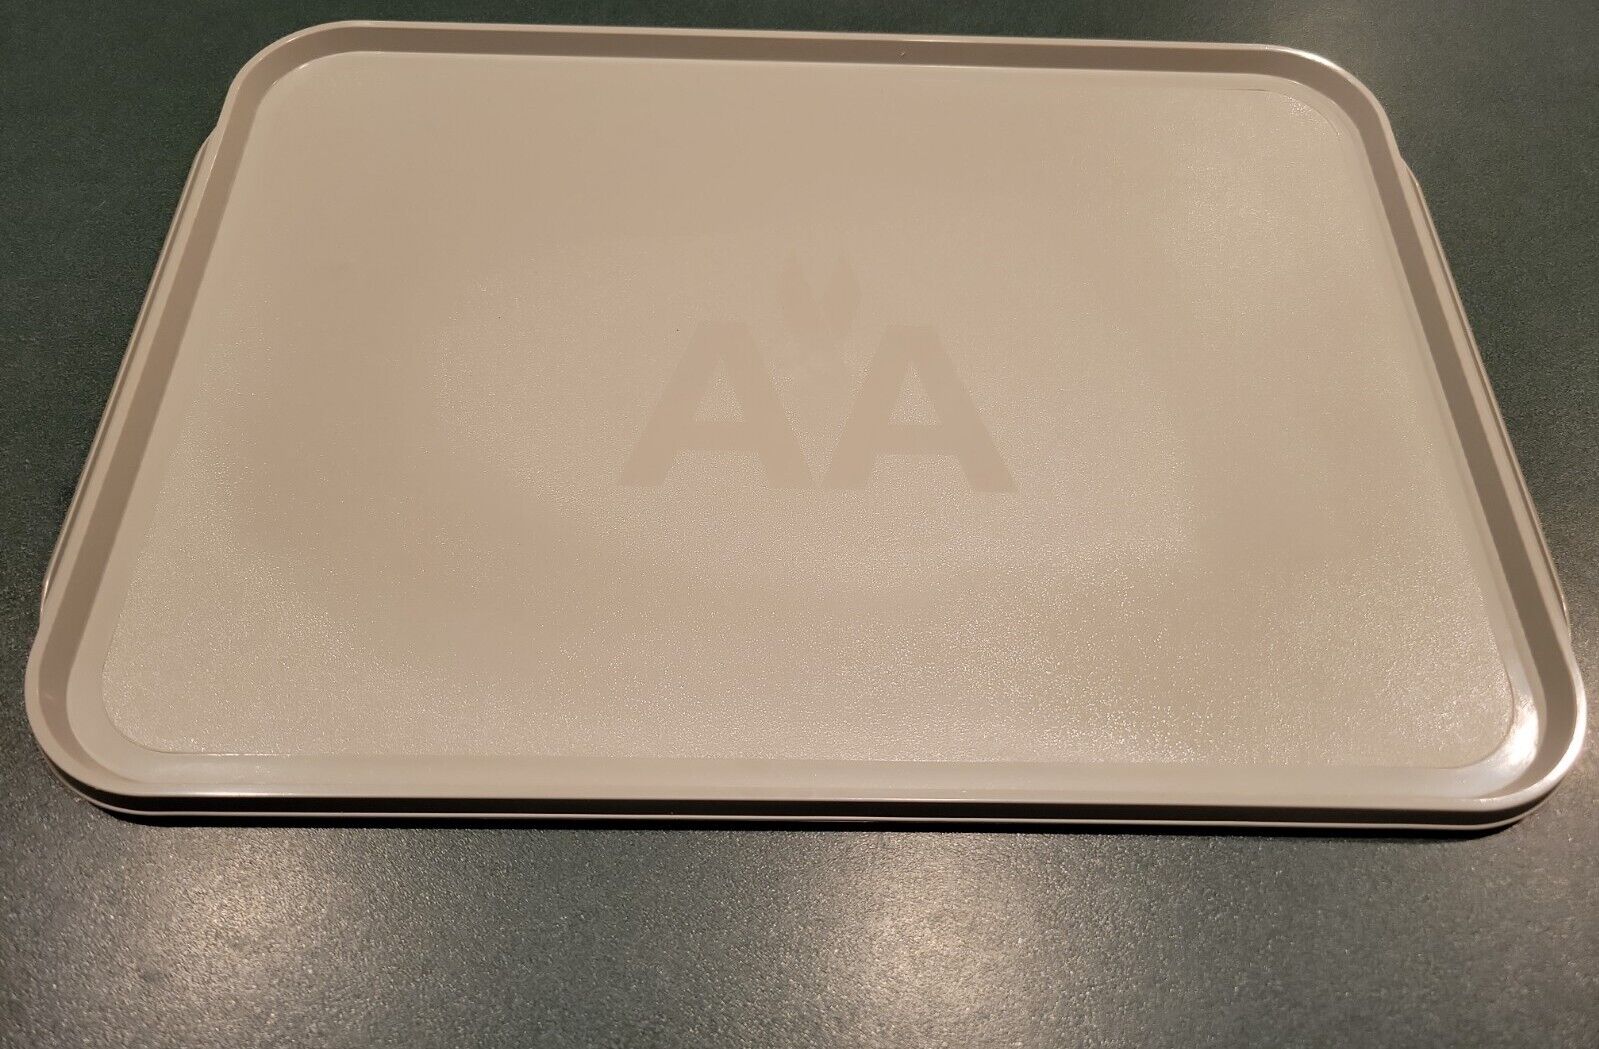 AMERICAN AIRLINES SERVING TRAY with Logo Never used   16